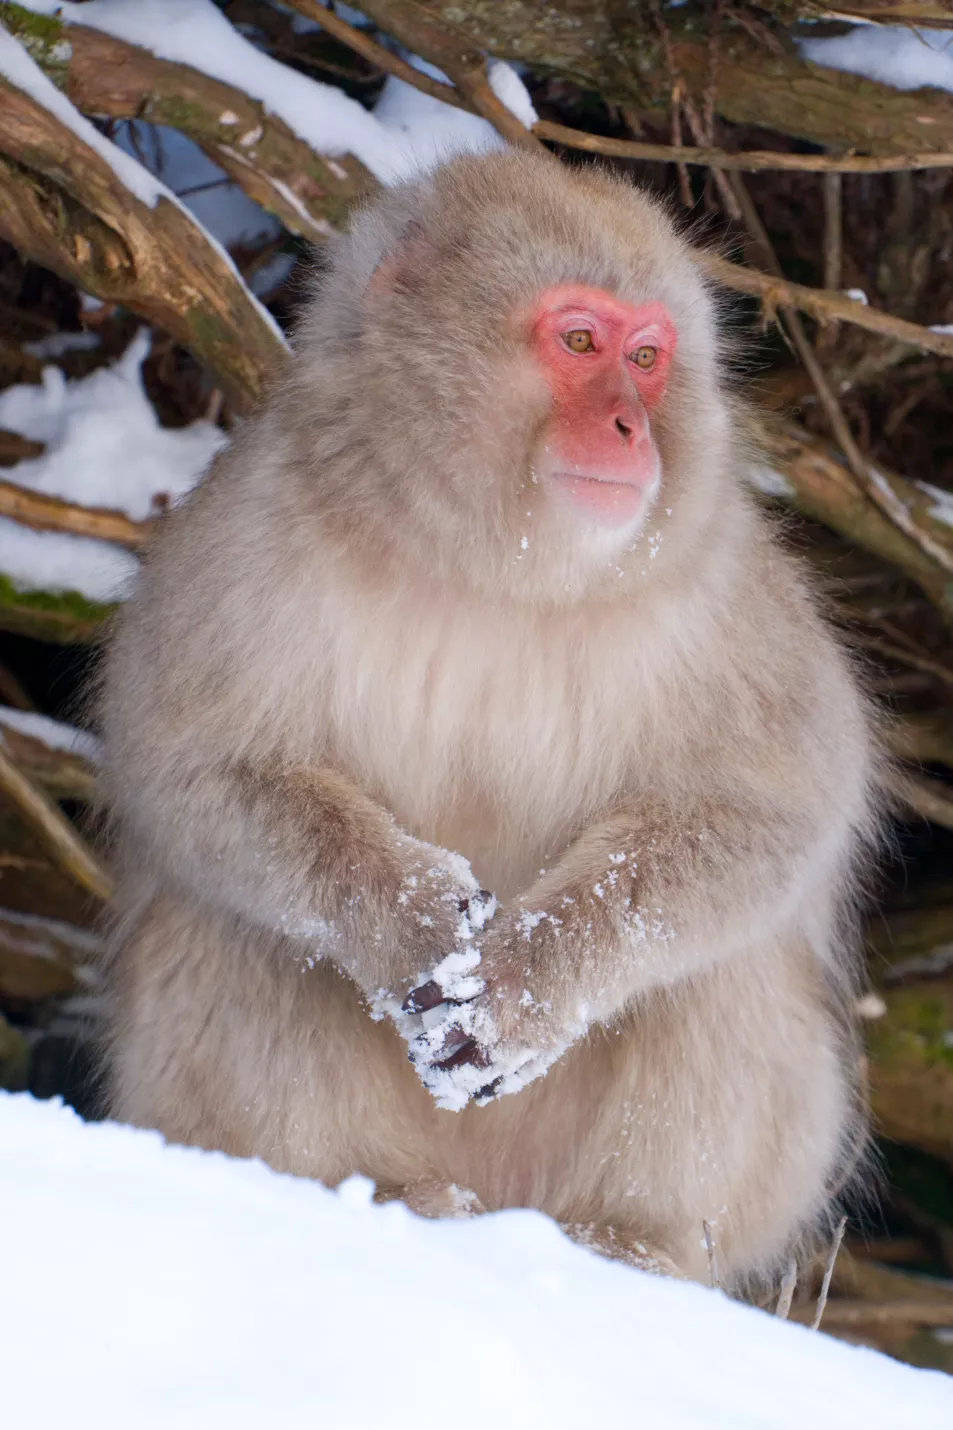 Japanese macaques in the wild